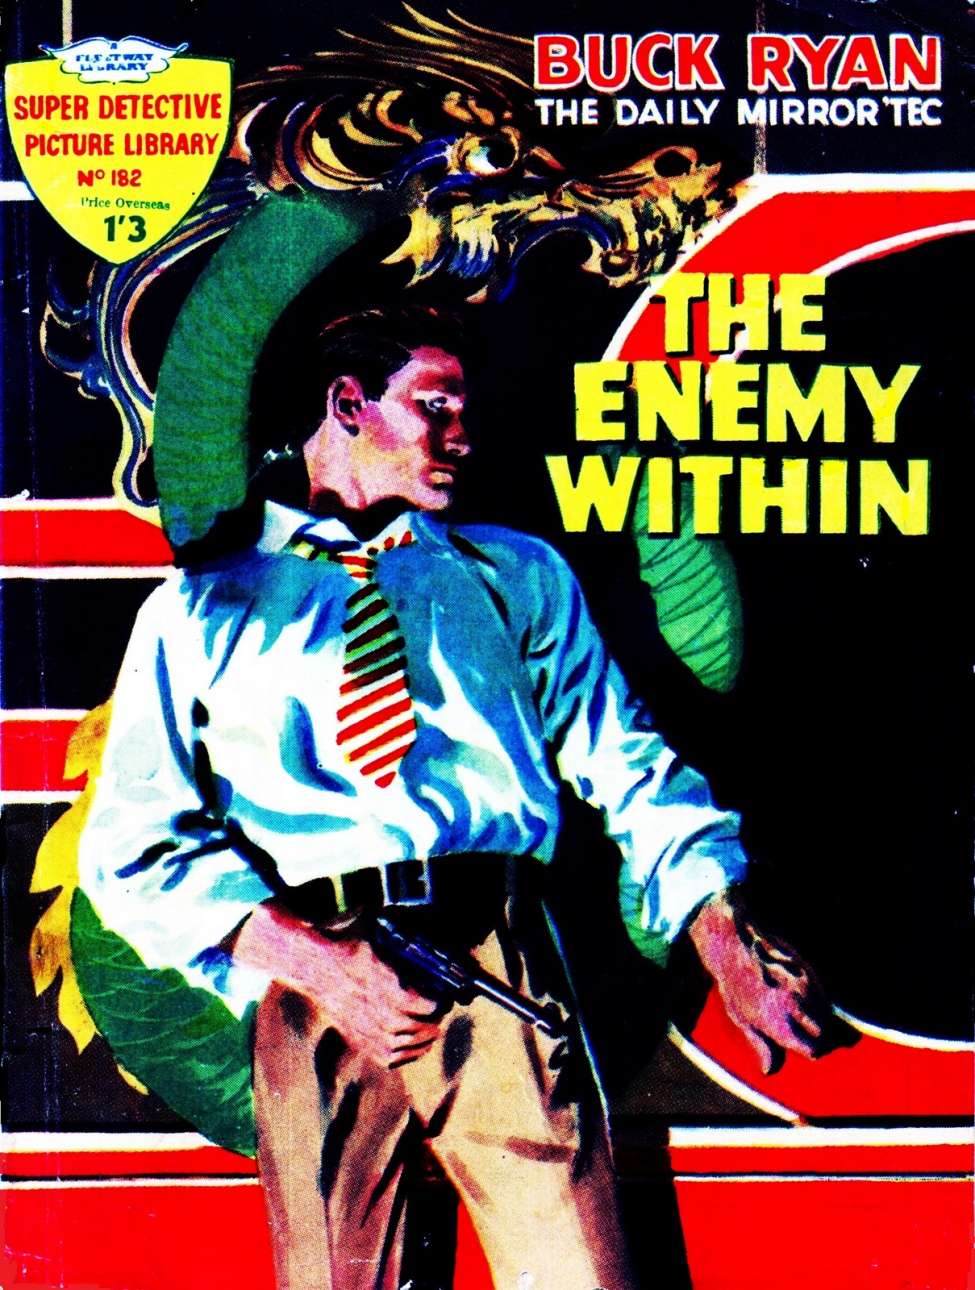 Book Cover For Super Detective Library 182 - Buck Ryan - The Enemy Within